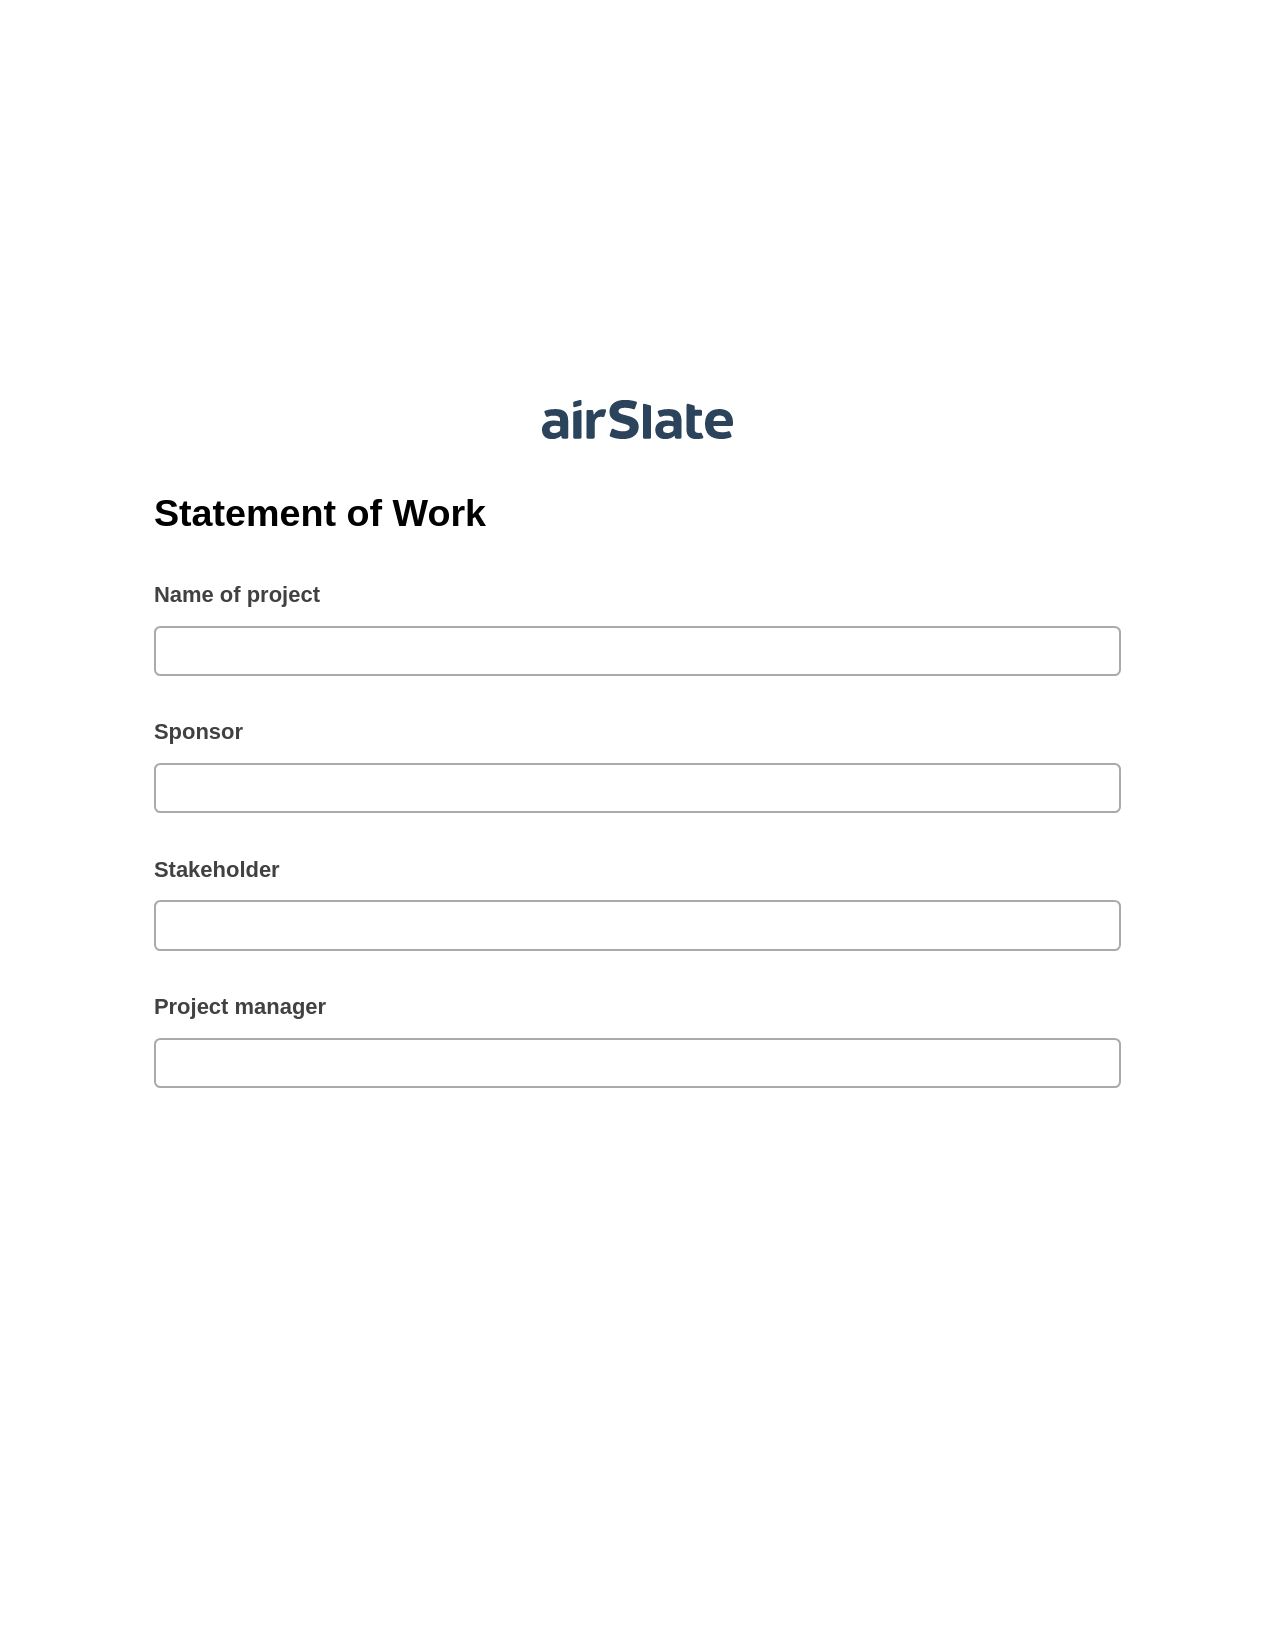 Statement of Work Pre-fill from Excel Spreadsheet Bot, Remove Tags From Slate Bot, Slack Notification Postfinish Bot